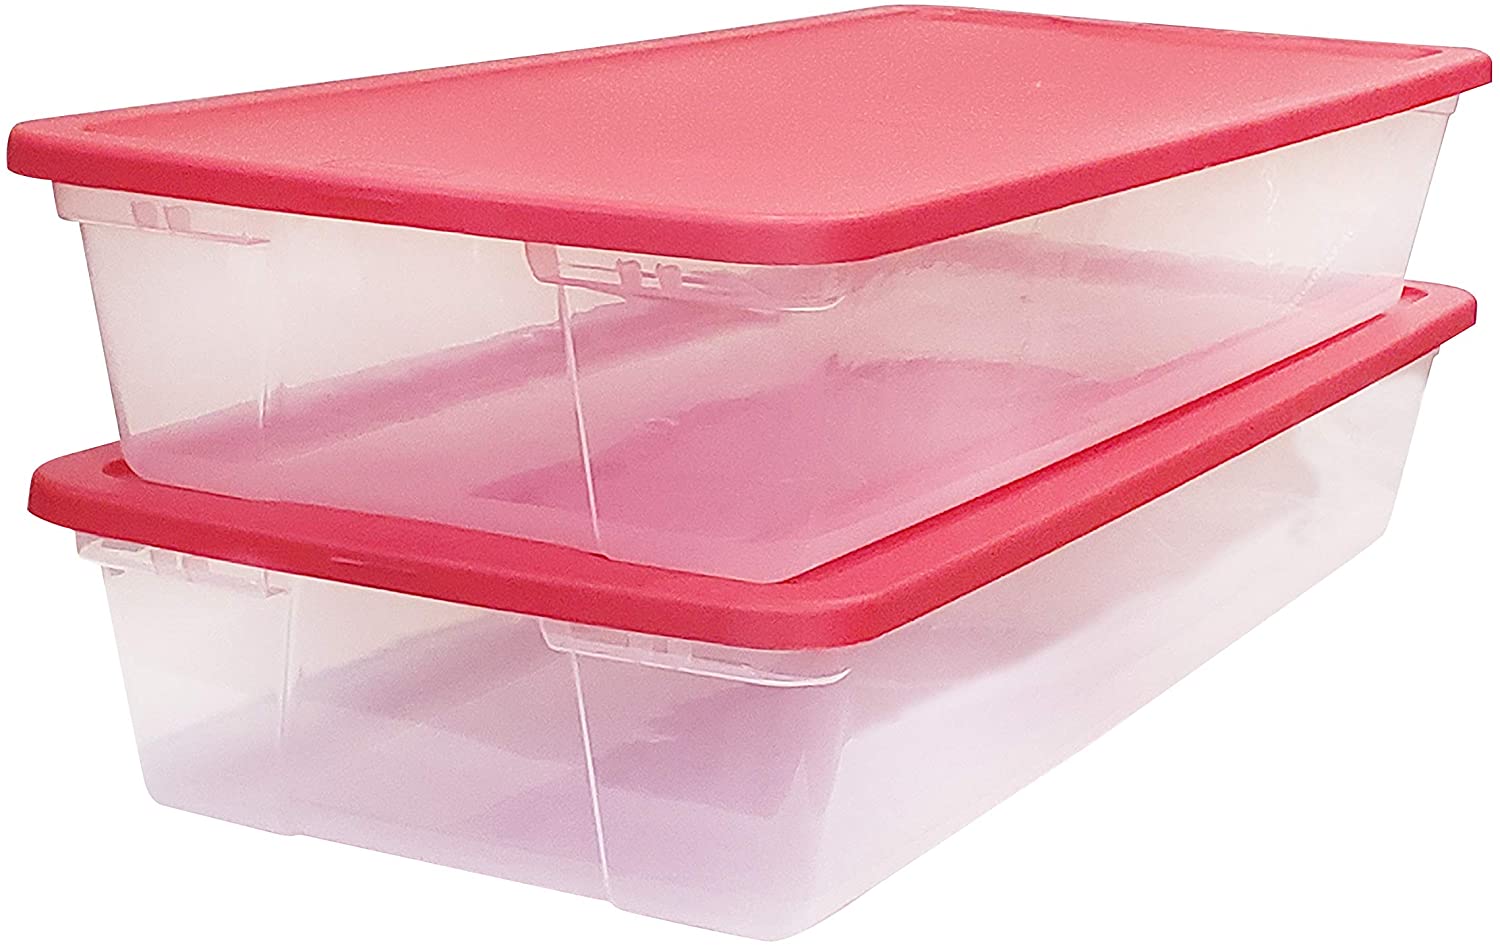 Plastic storage bins with lid that is red